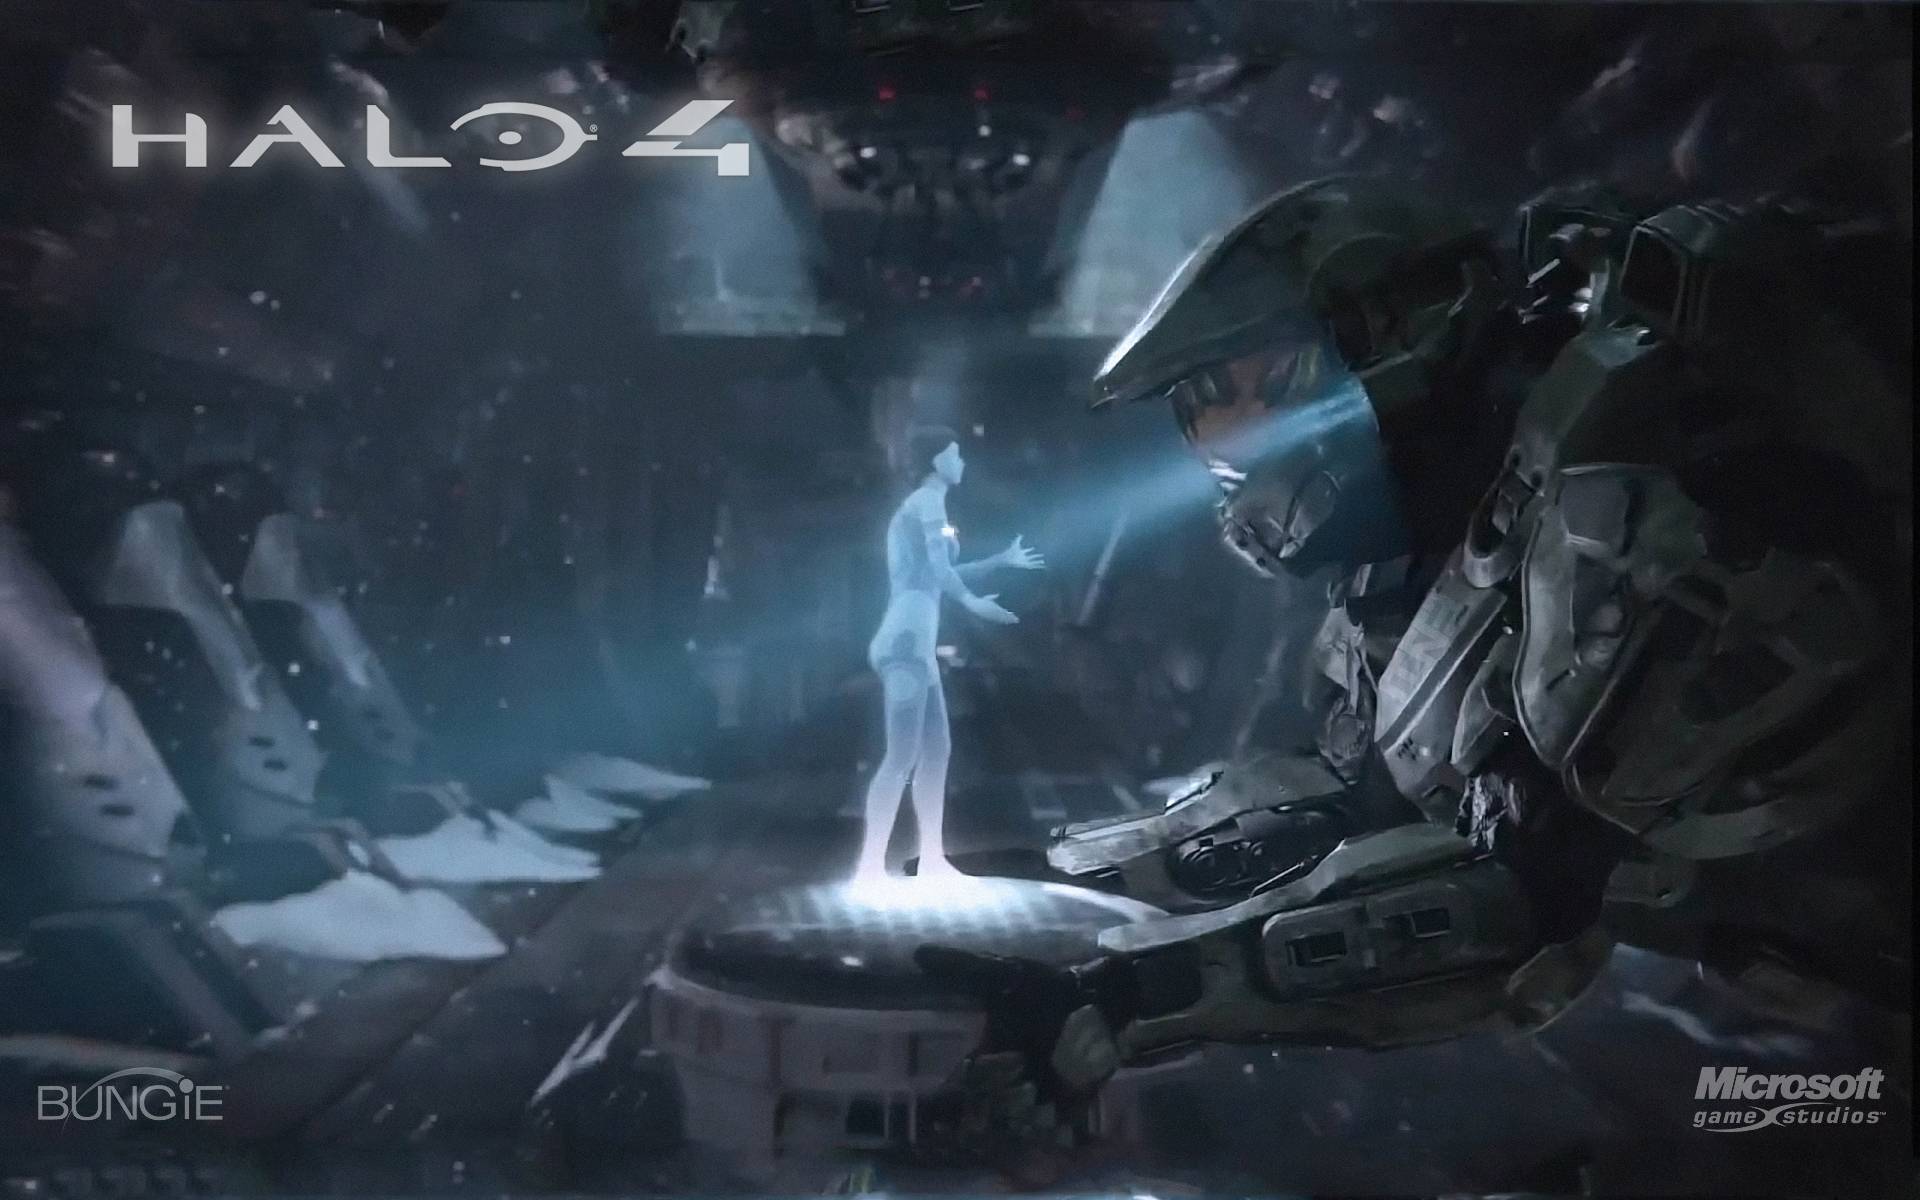 Halo 4 Wallpaper HD Exclusive by Ockre